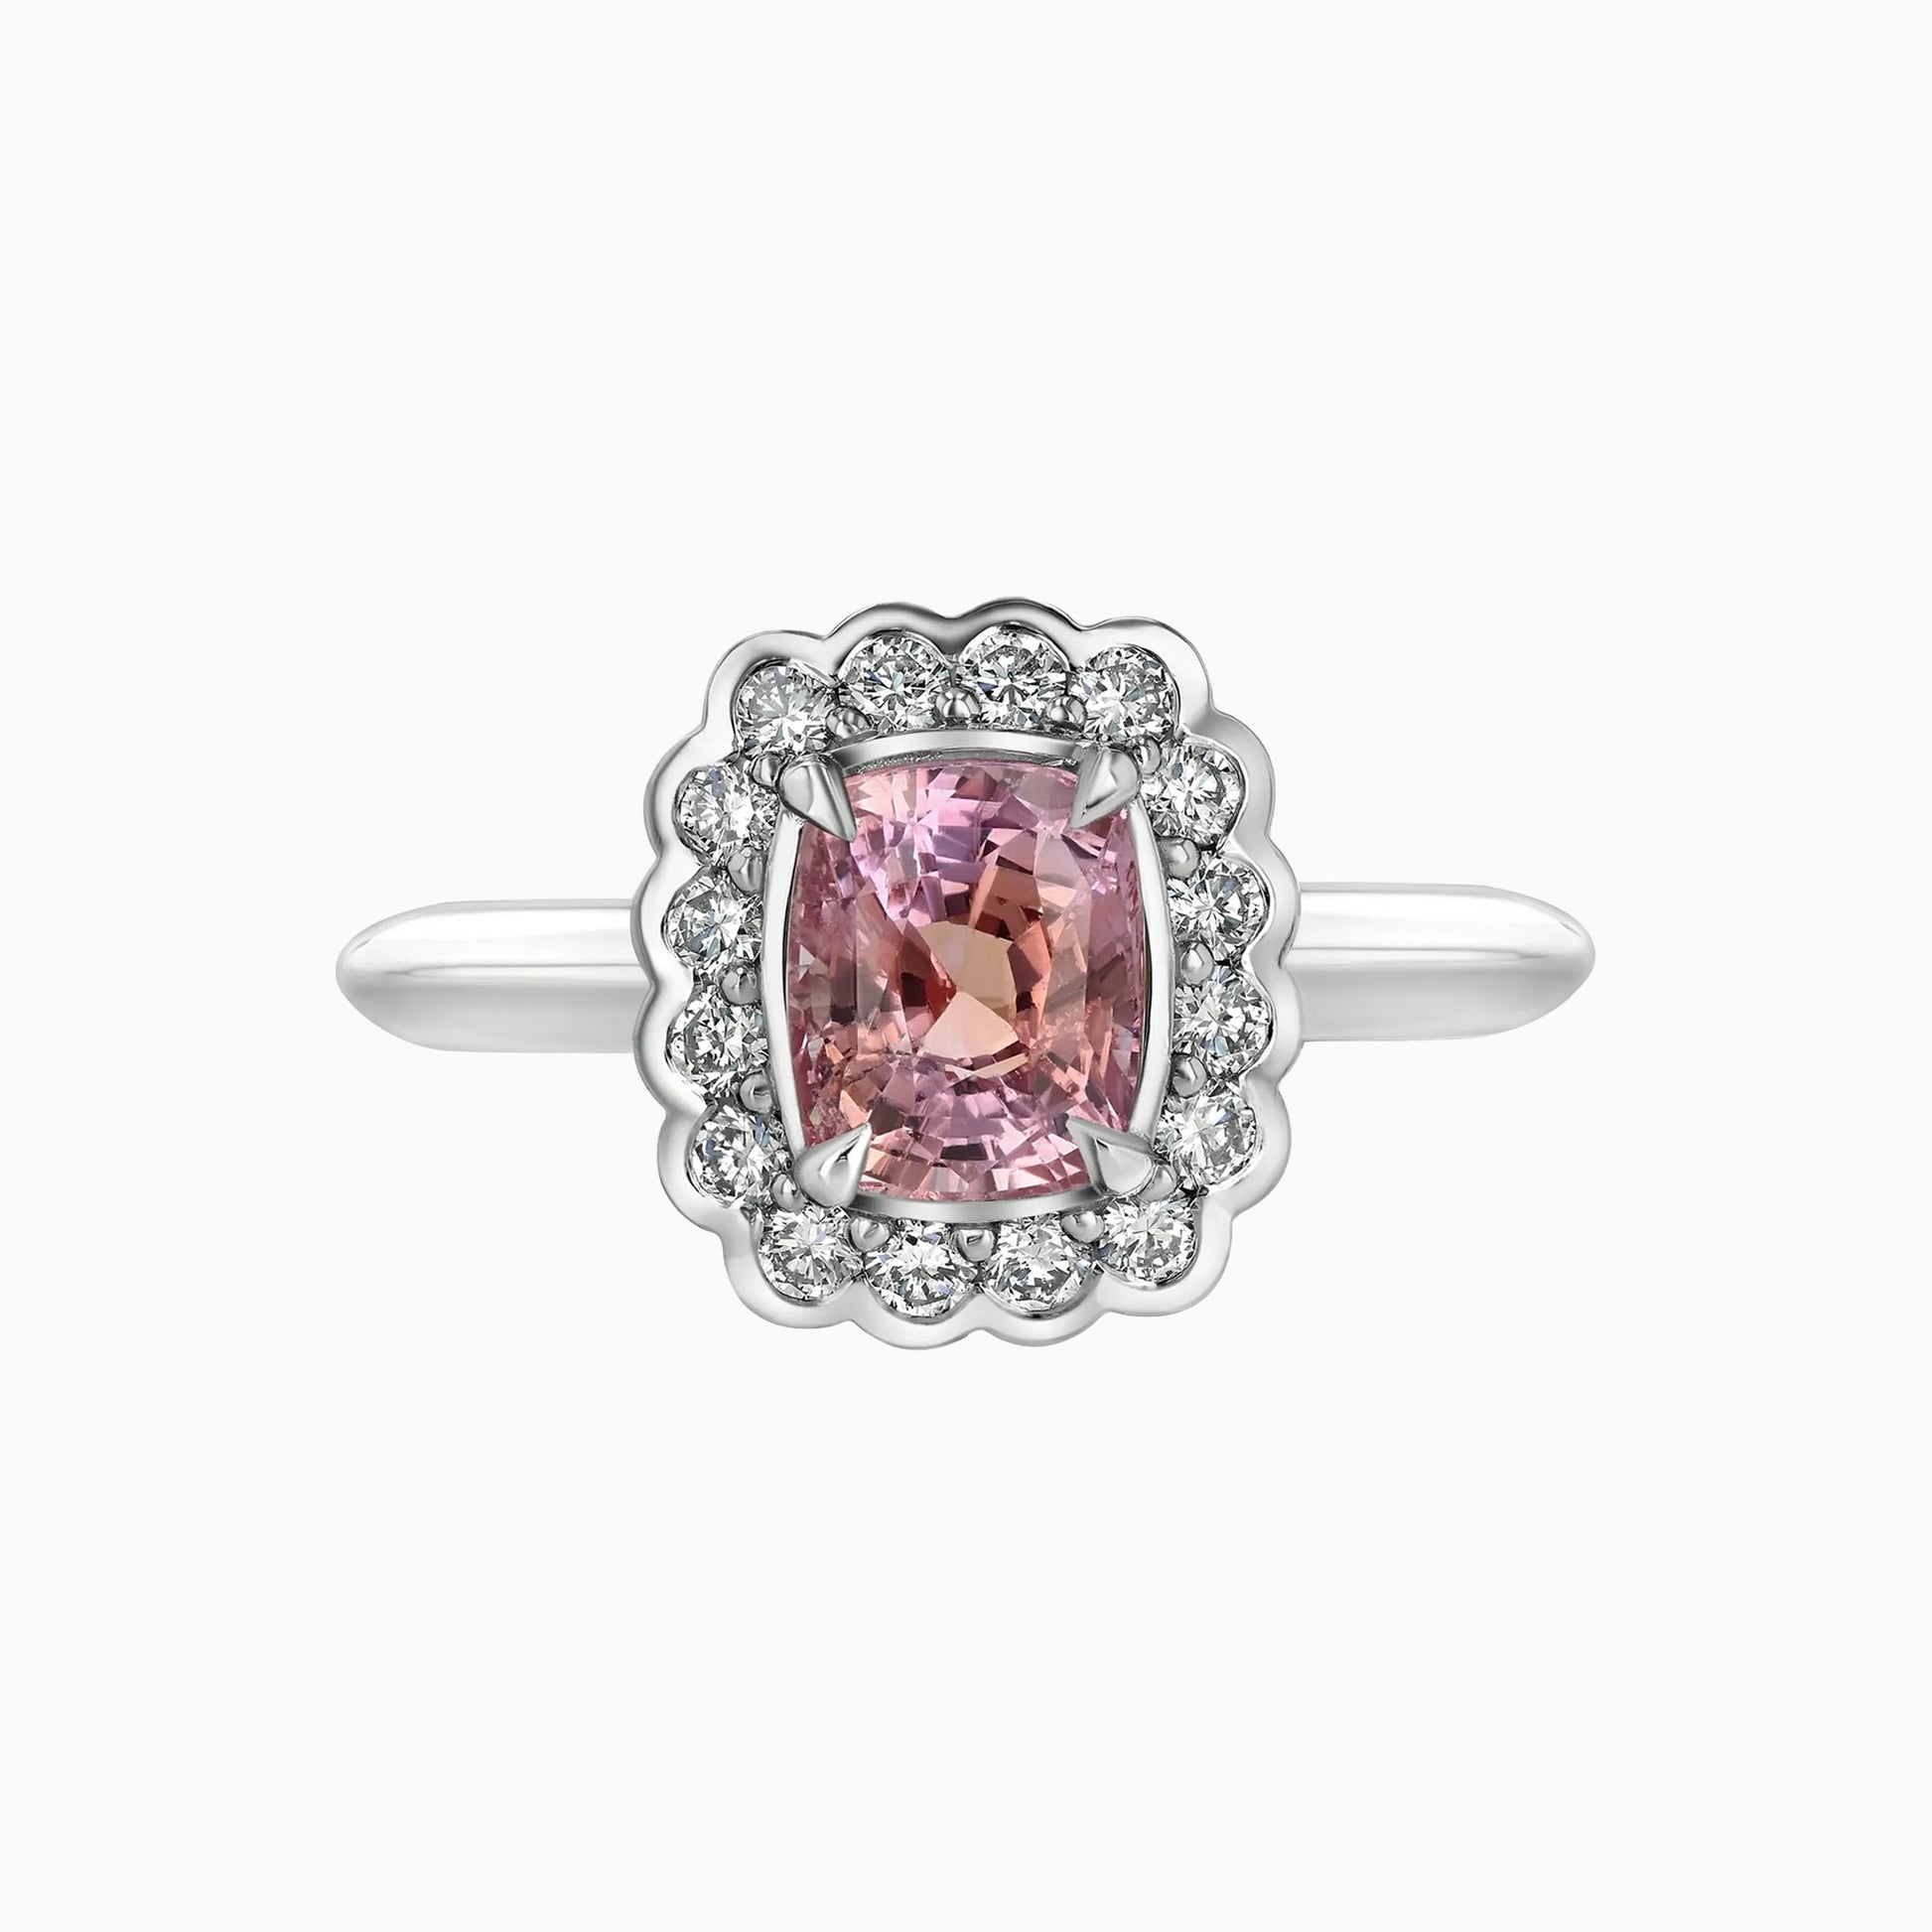 Padparadscha Sapphire Platinum Ring on a white background